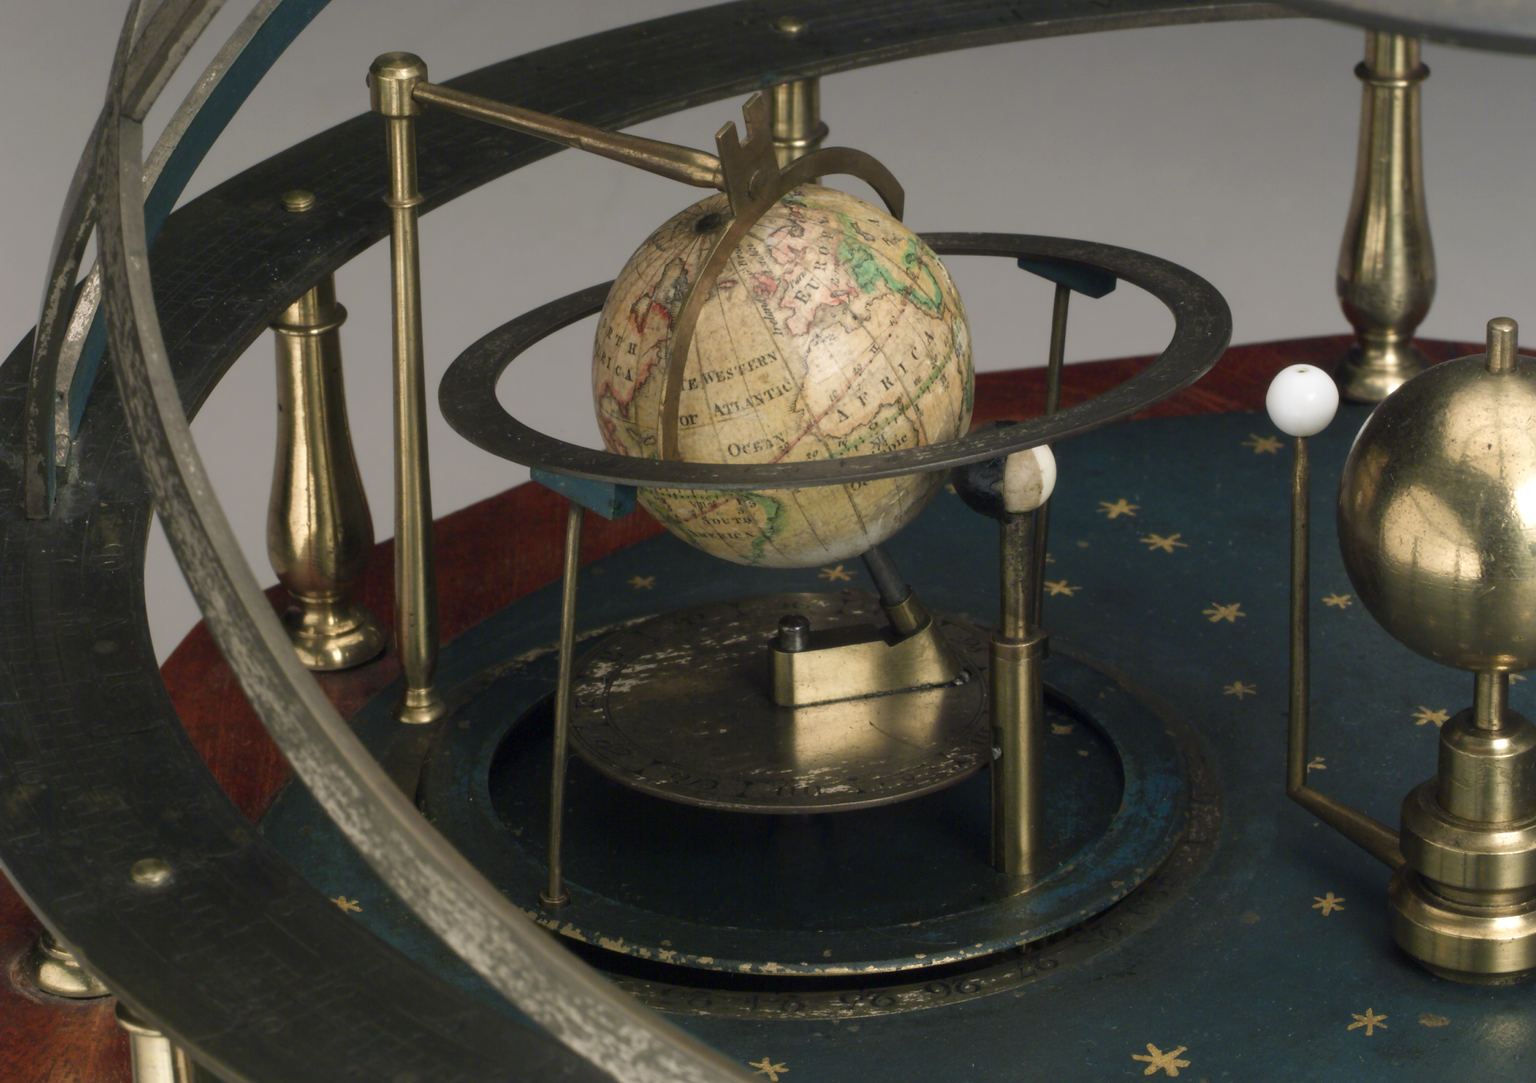 Detail of the miniature orrery made by Edward Troughton